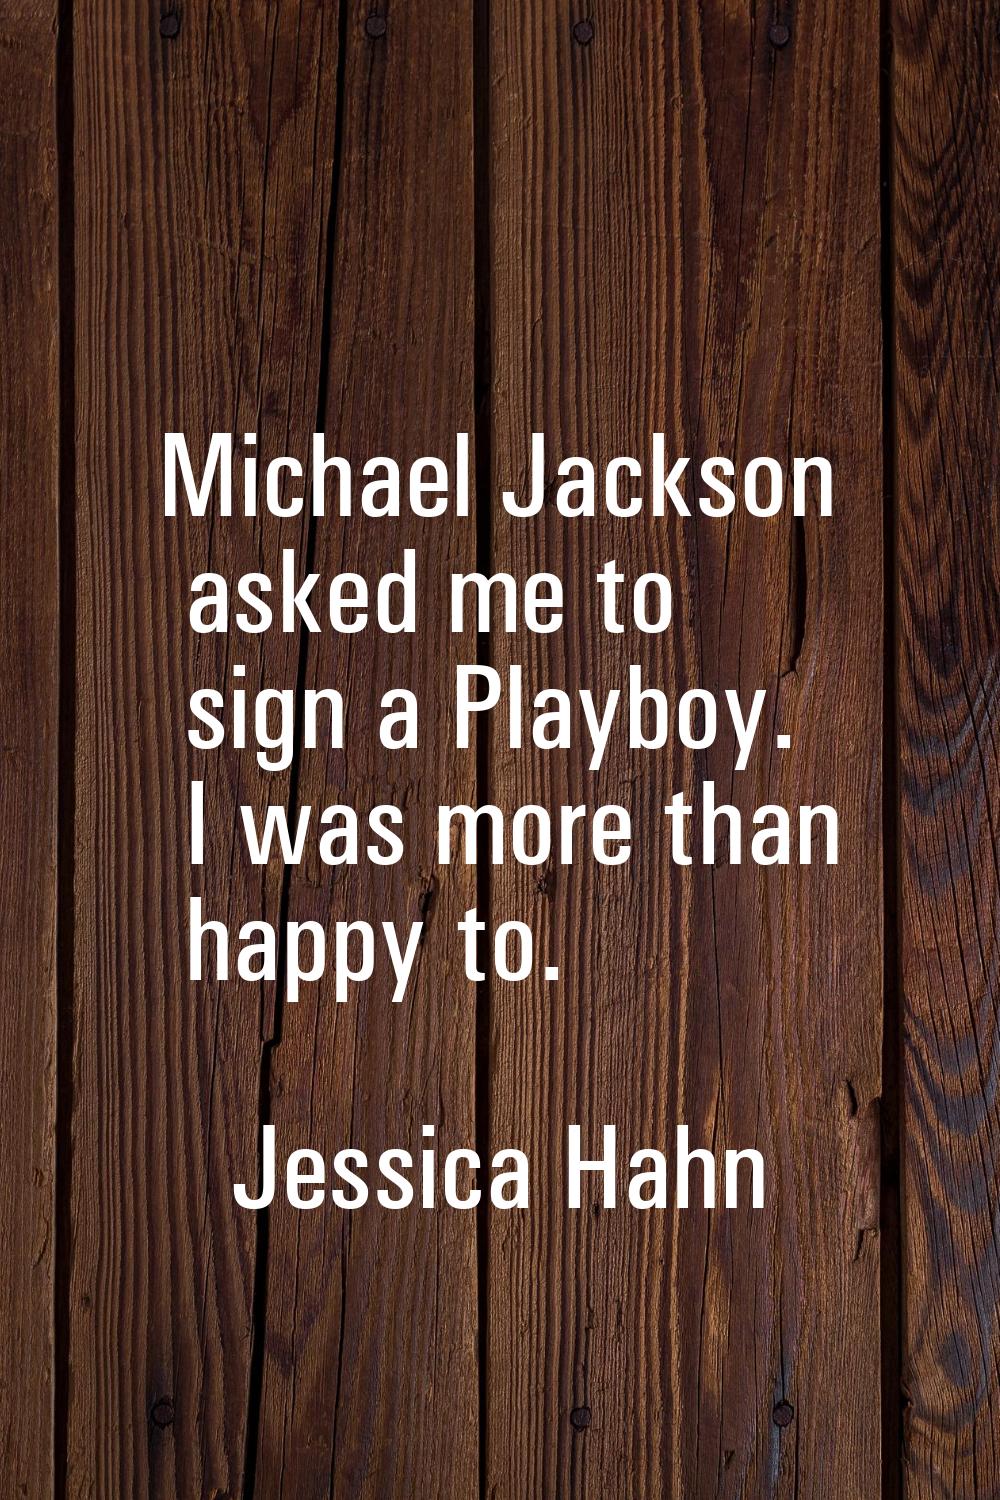 Michael Jackson asked me to sign a Playboy. I was more than happy to.